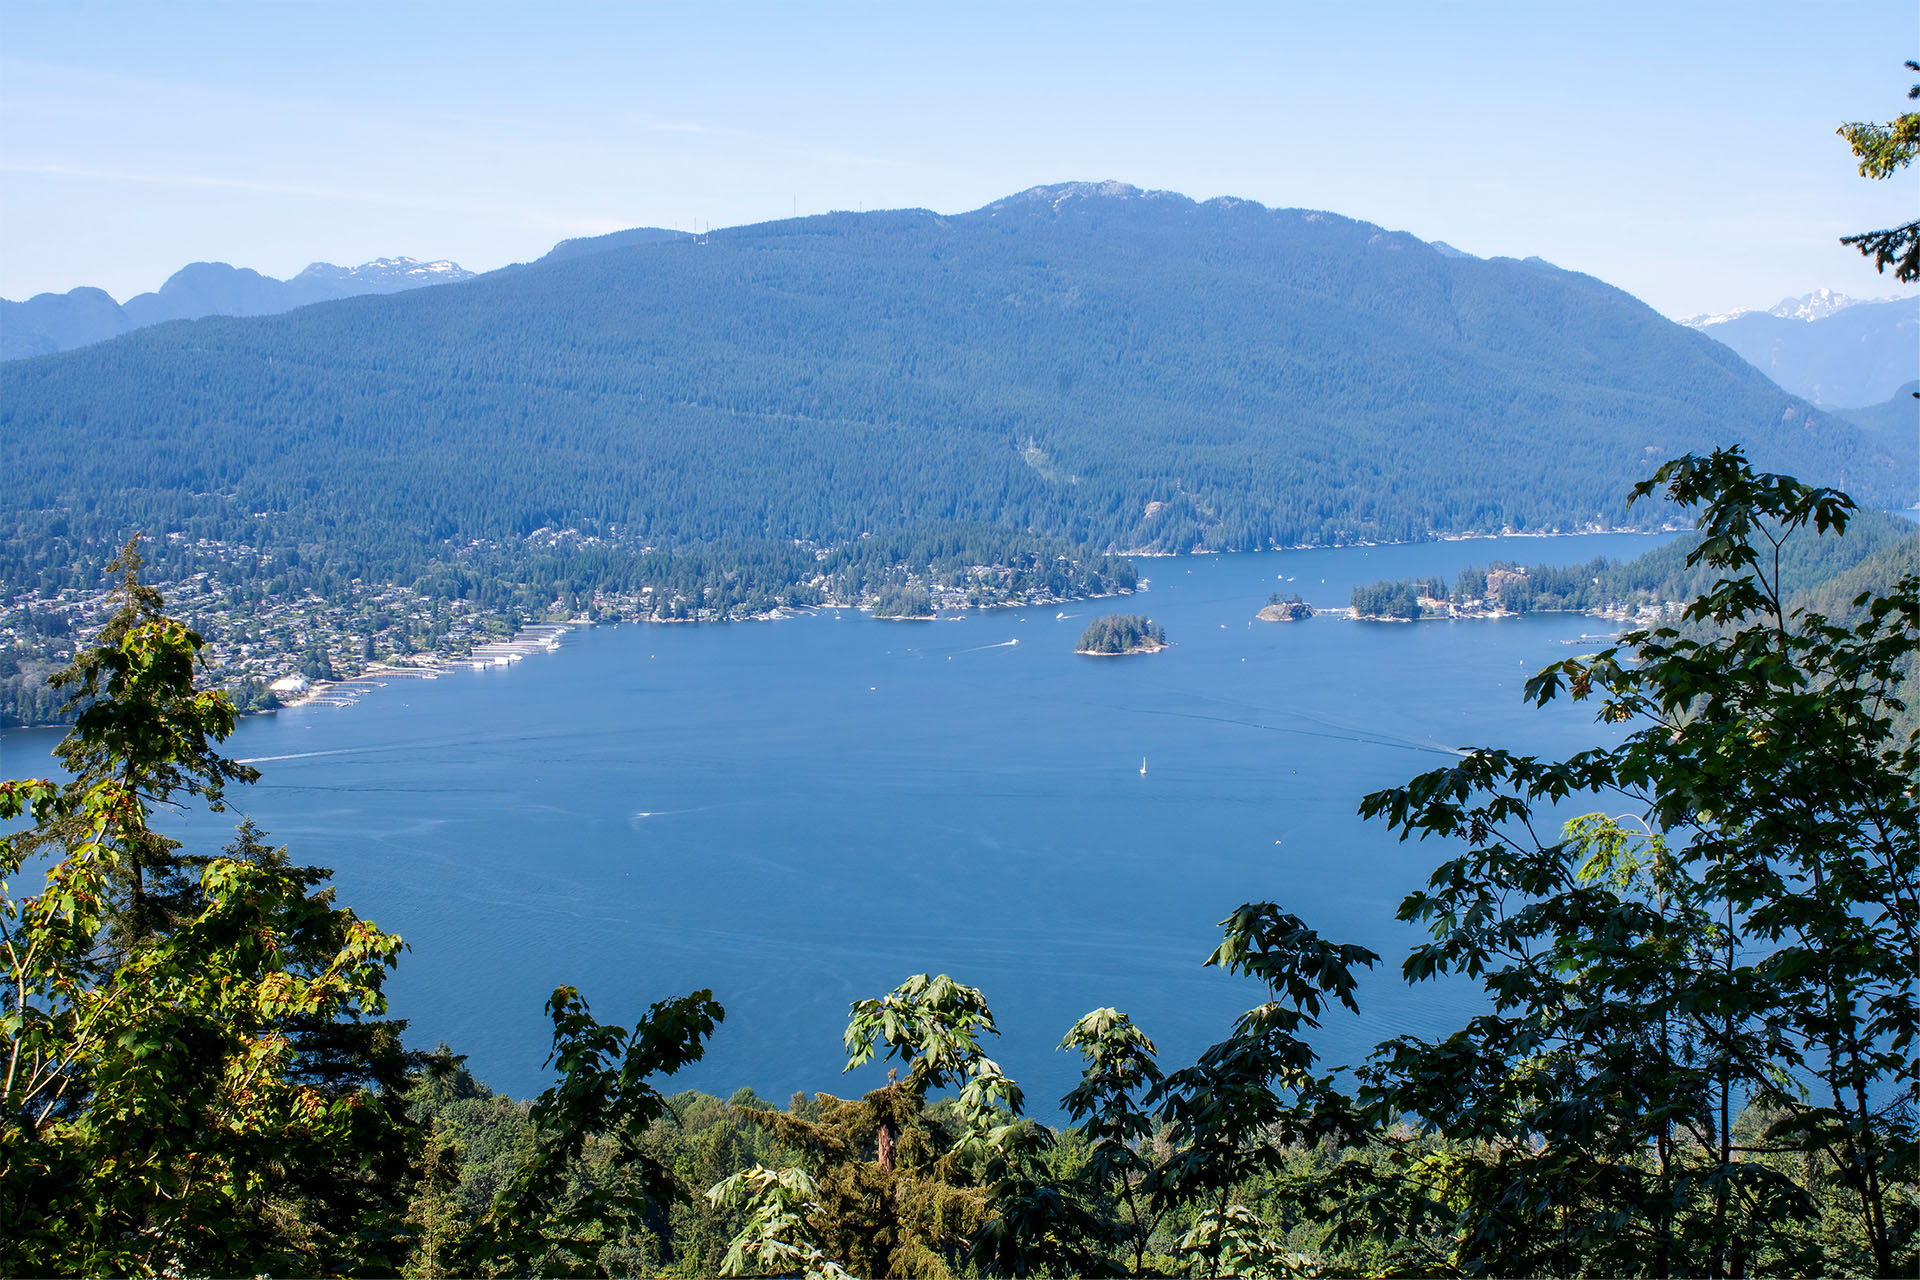 A view from the Burnaby Mountain Convervation Area overlooking water and trees